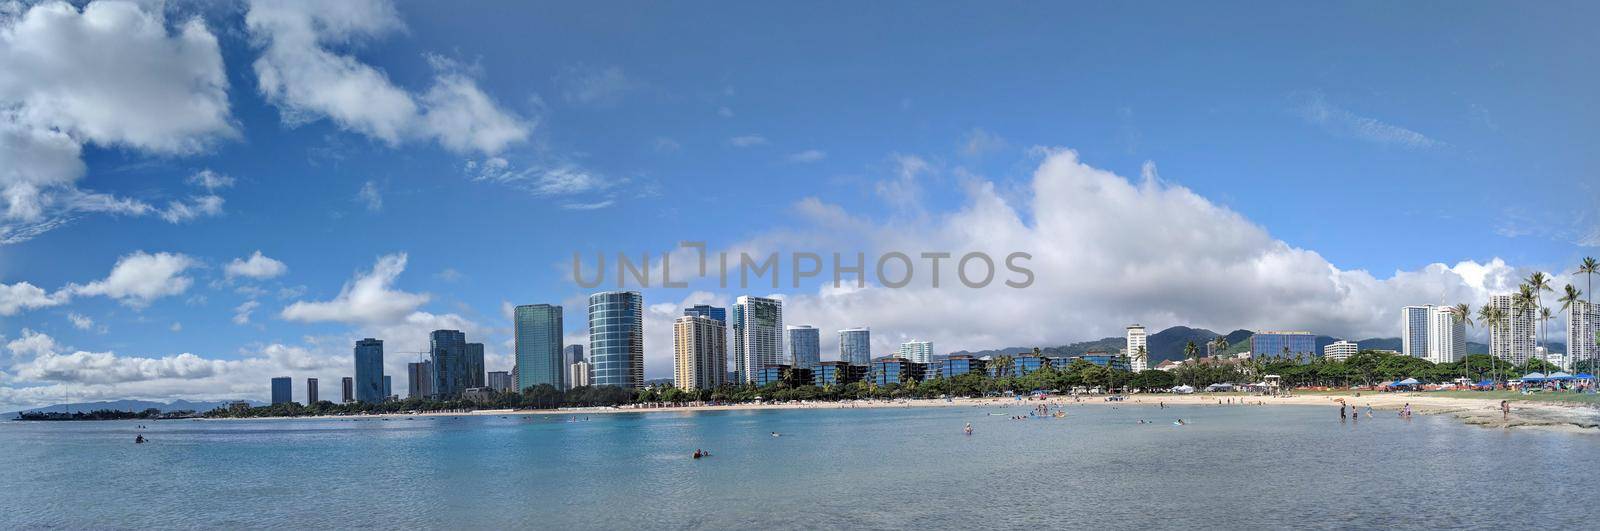 Honolulu - September 30, 2018:  Ala Moana Beach Park with office building and condos in the background during a beautiful day on the island of Oahu, Hawaii. 